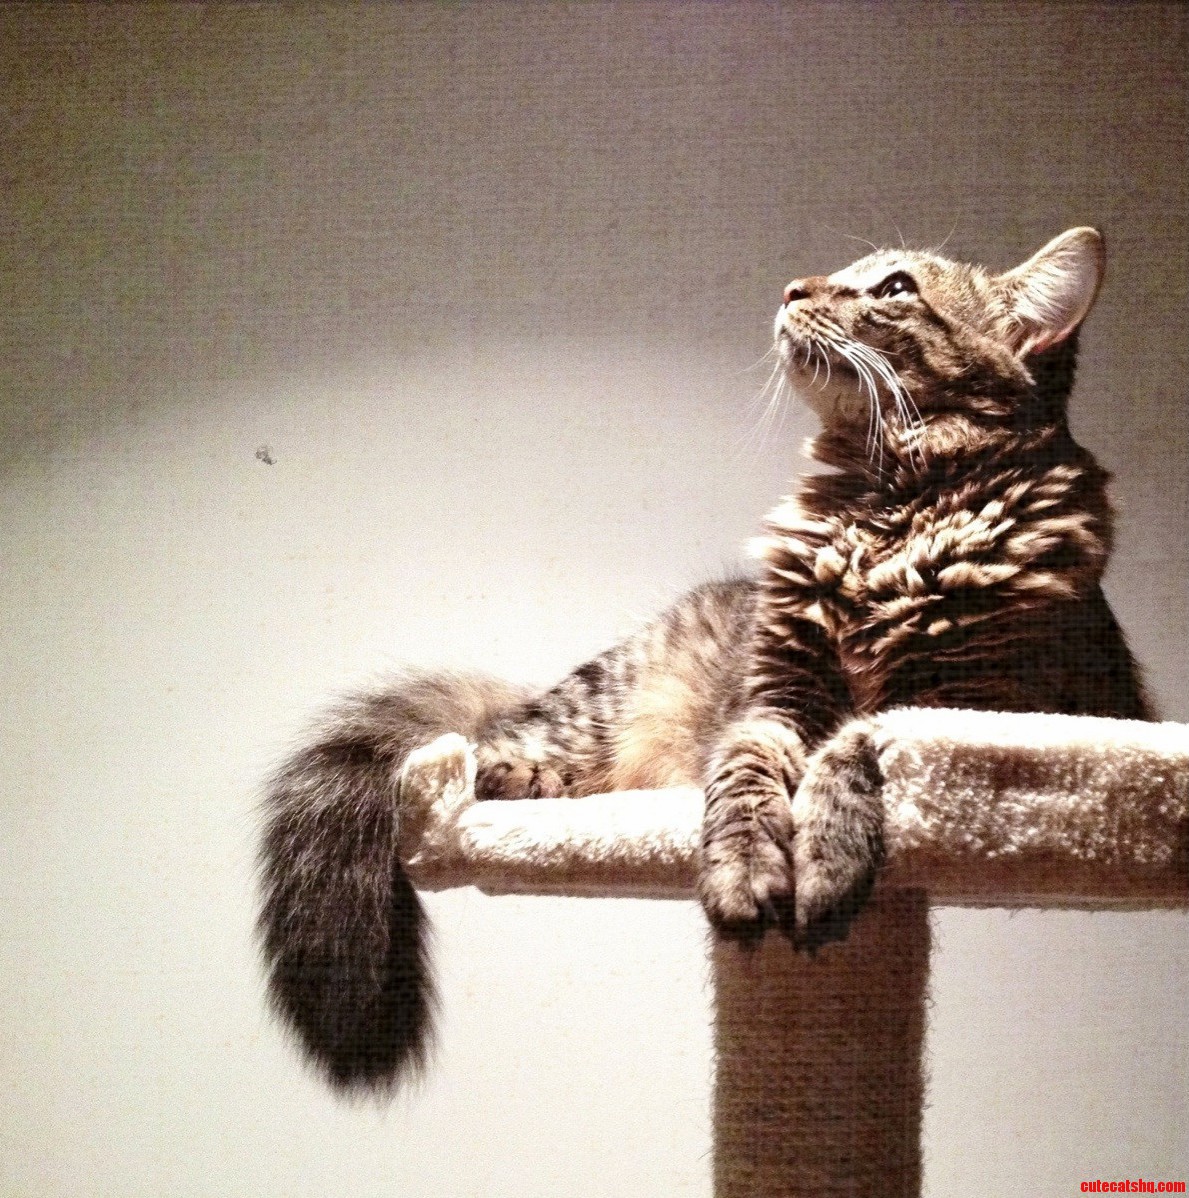 My Maine Coon Cat Sansa Looking Regal On Her Perch